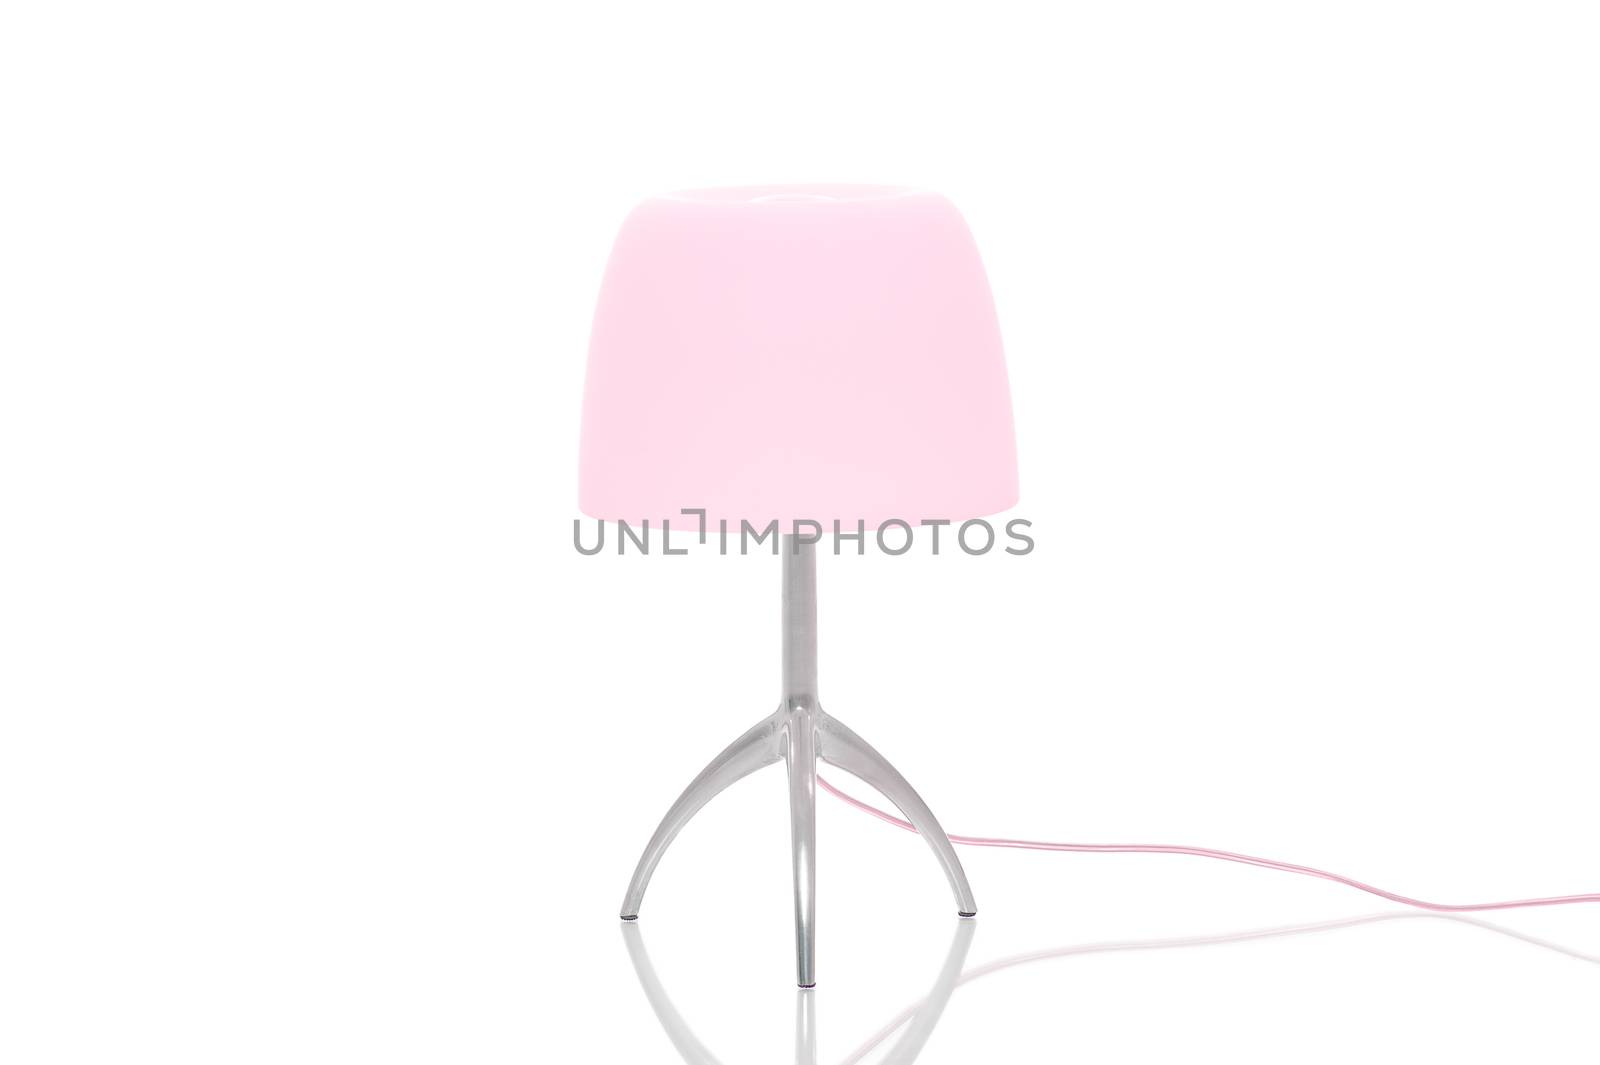 Elegant metal lamp with tripod legs and a pink lampshade standing on a reflective white surface with copyspace